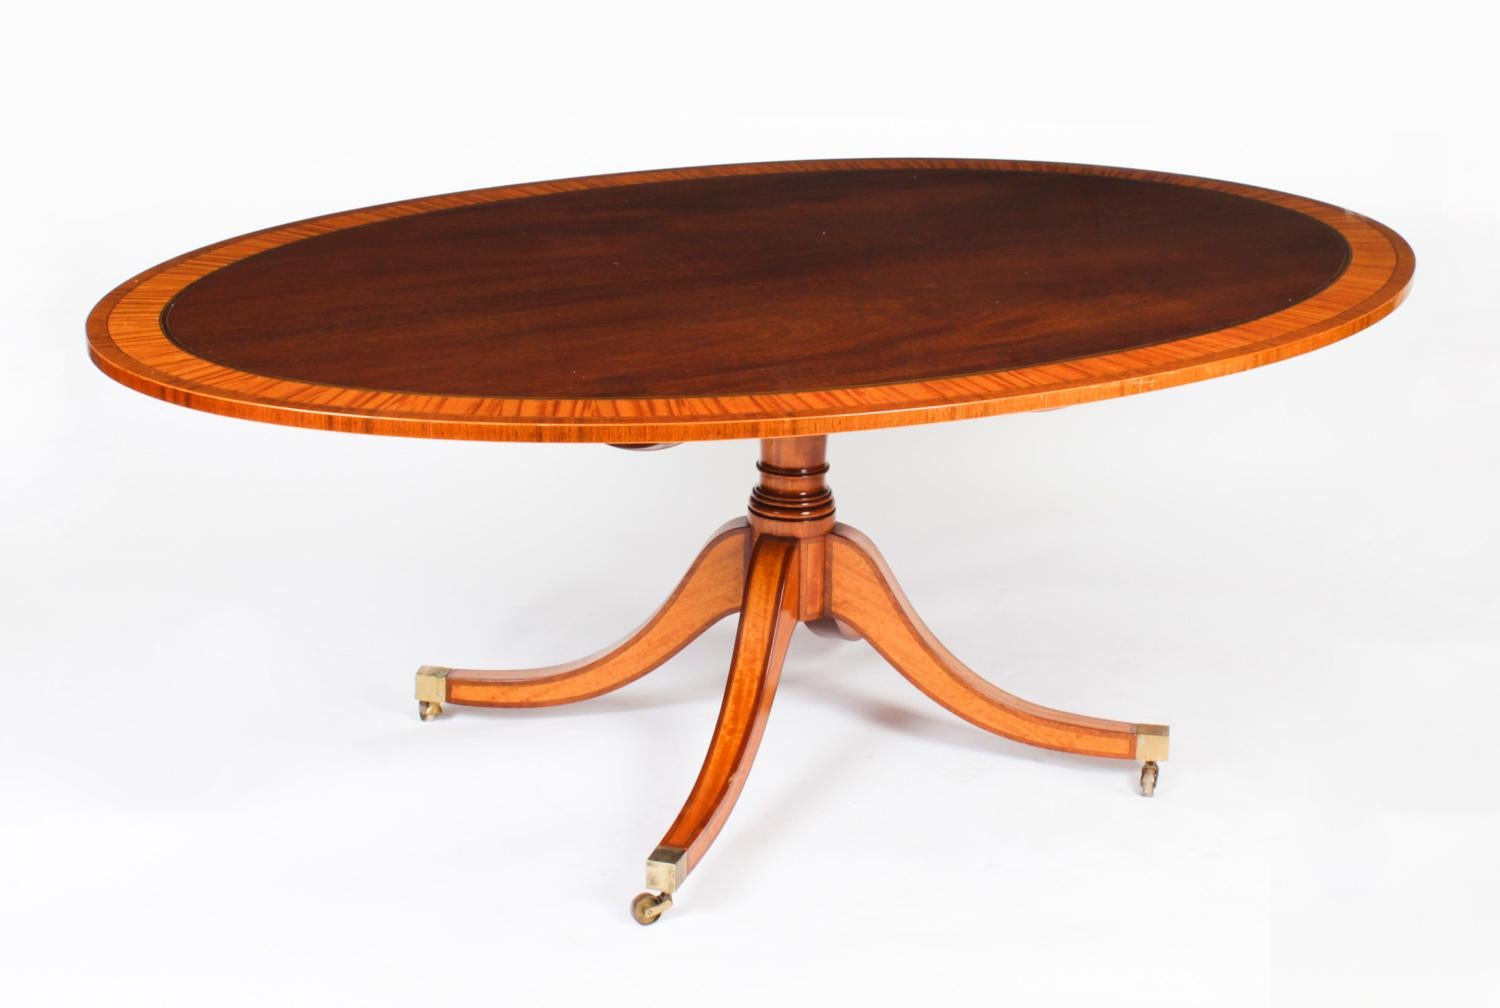 This is a beautiful Regency Revival flame mahogany and Satinwood banded oval dining table dating from Circa 1980, made by the Master Cabinet maker William Tillman and bearing his label on the underside, with a matching set of eight swagback Regency